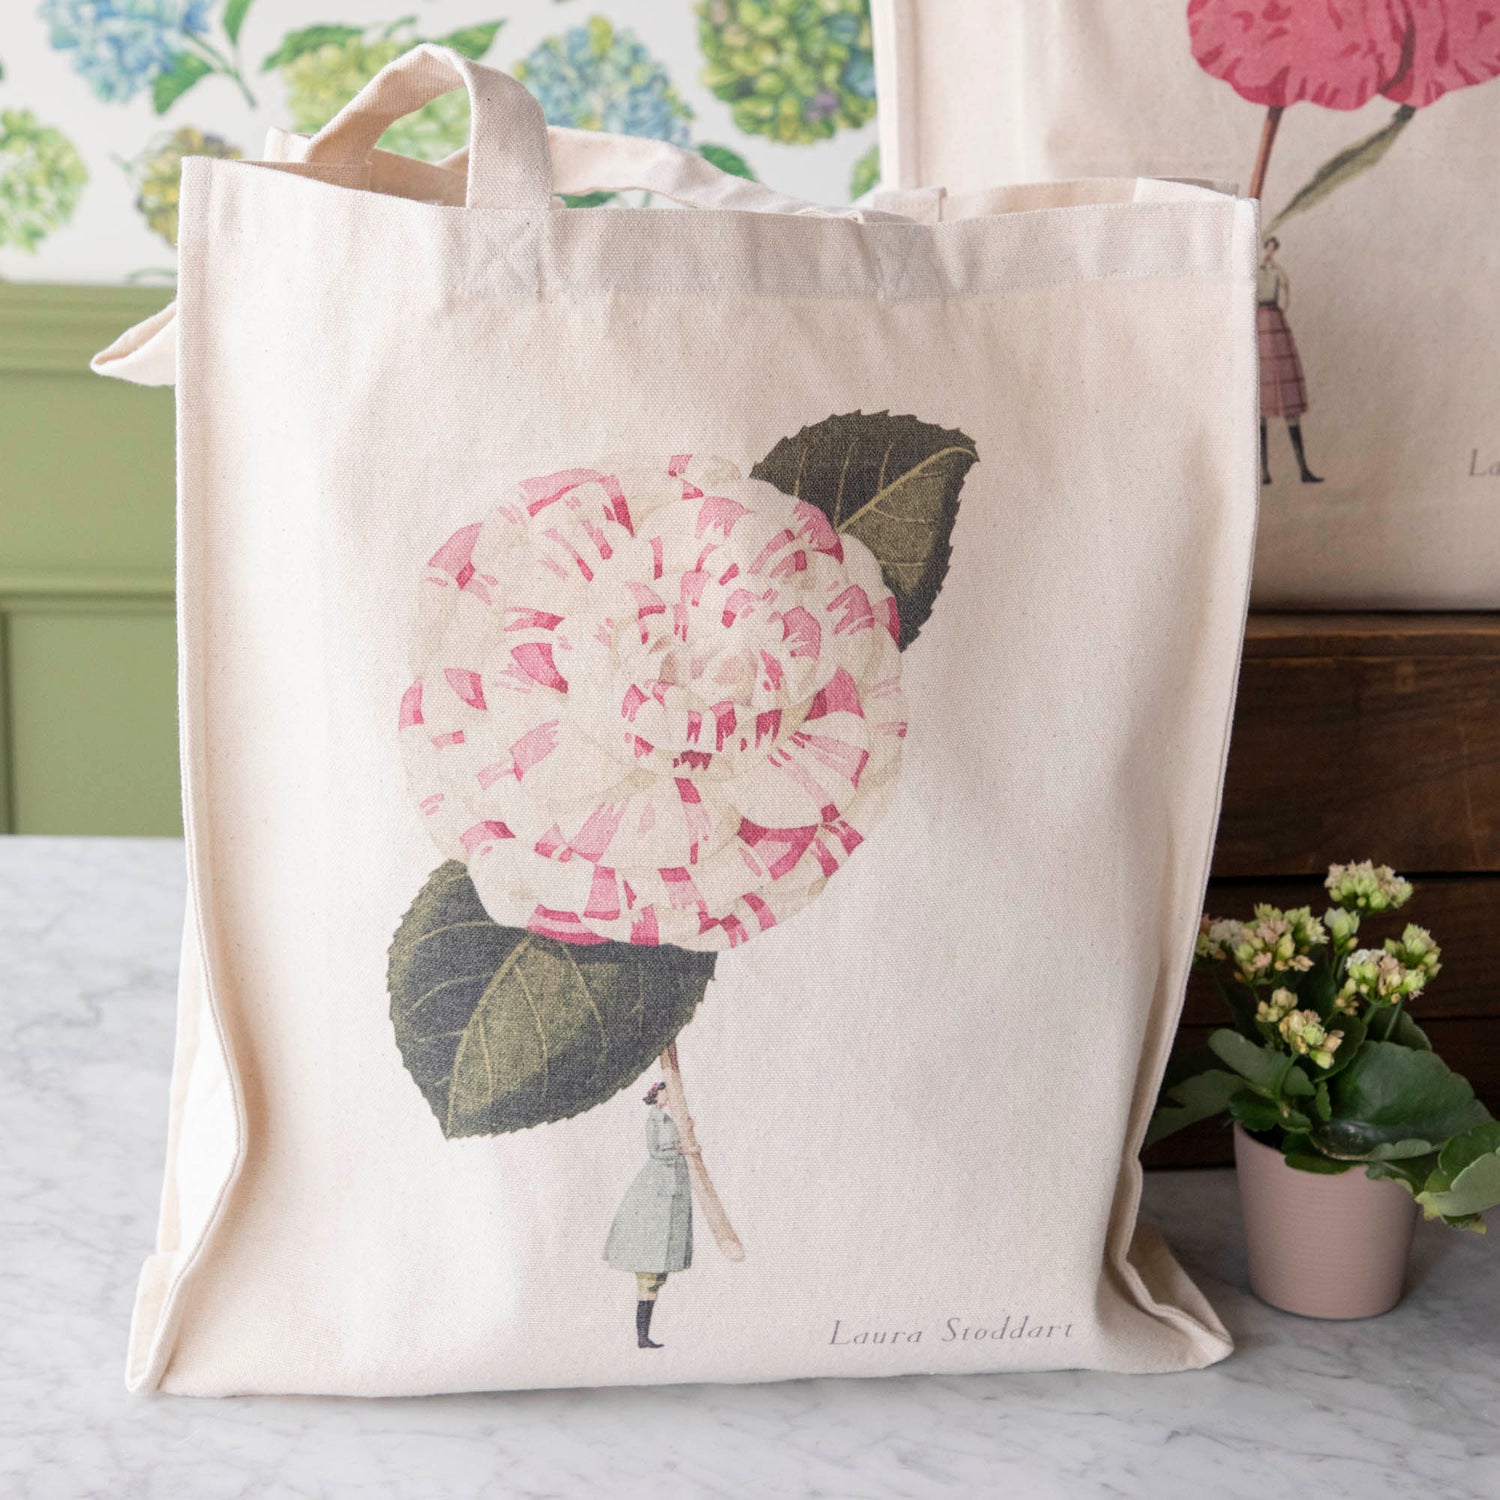 Close-up of the Camelia Heavyweight Canvas Tote Bag standing upright in a display, showing the beautiful illustration of a woman holding a gigantic white and pink flower by the stem.